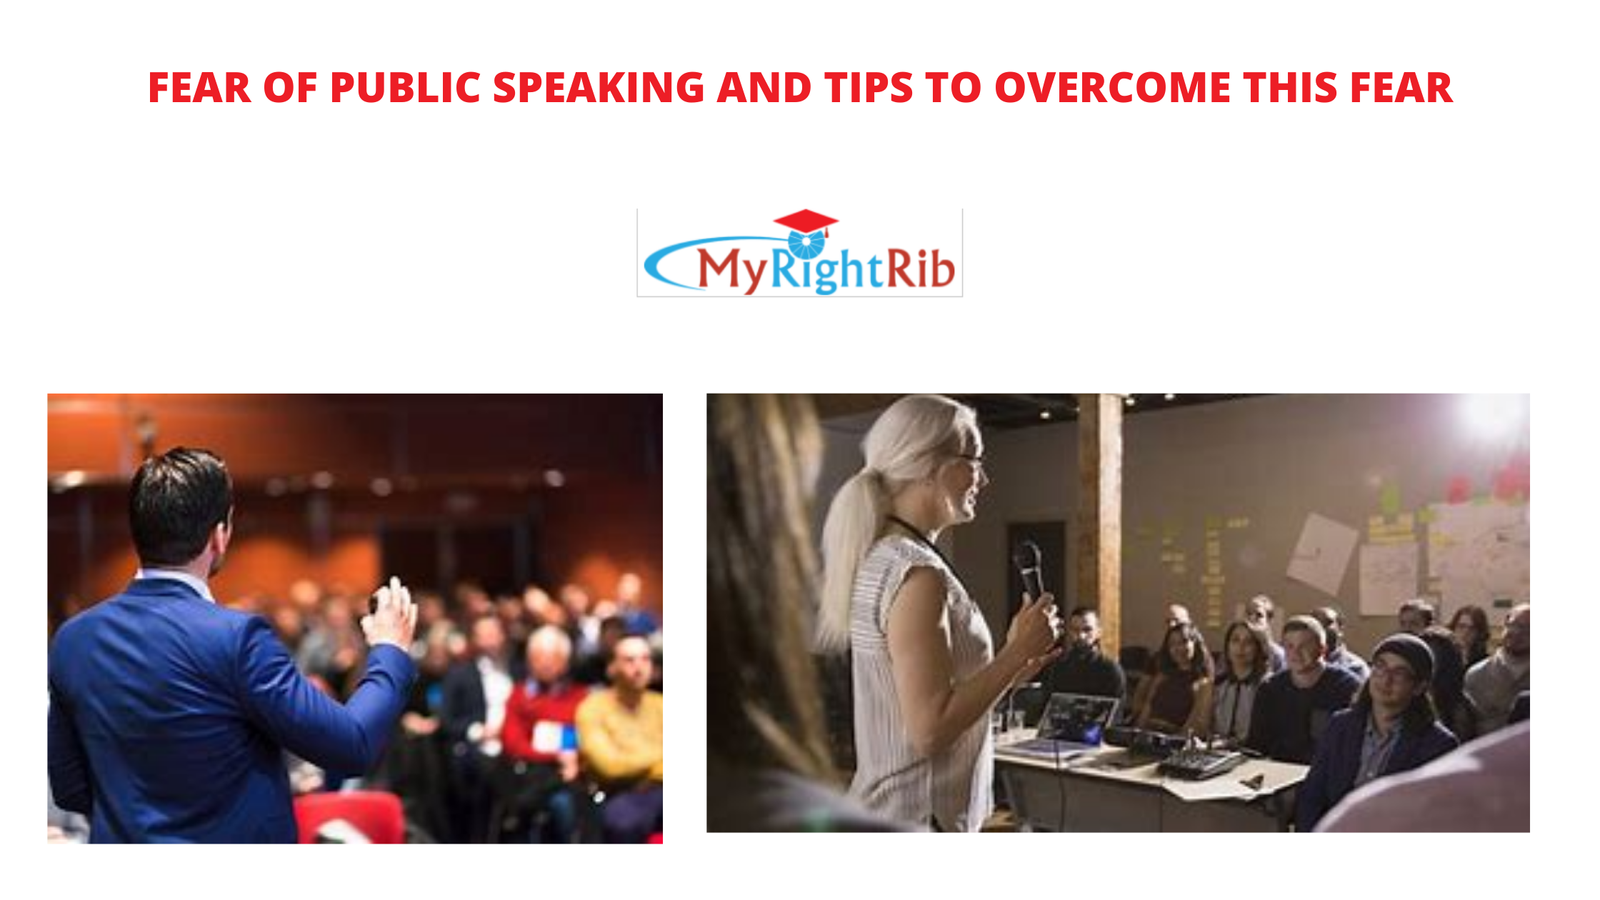 FEAR OF PUBLIC SPEAKING AND TIPS TO OVERCOME THIS FEAR